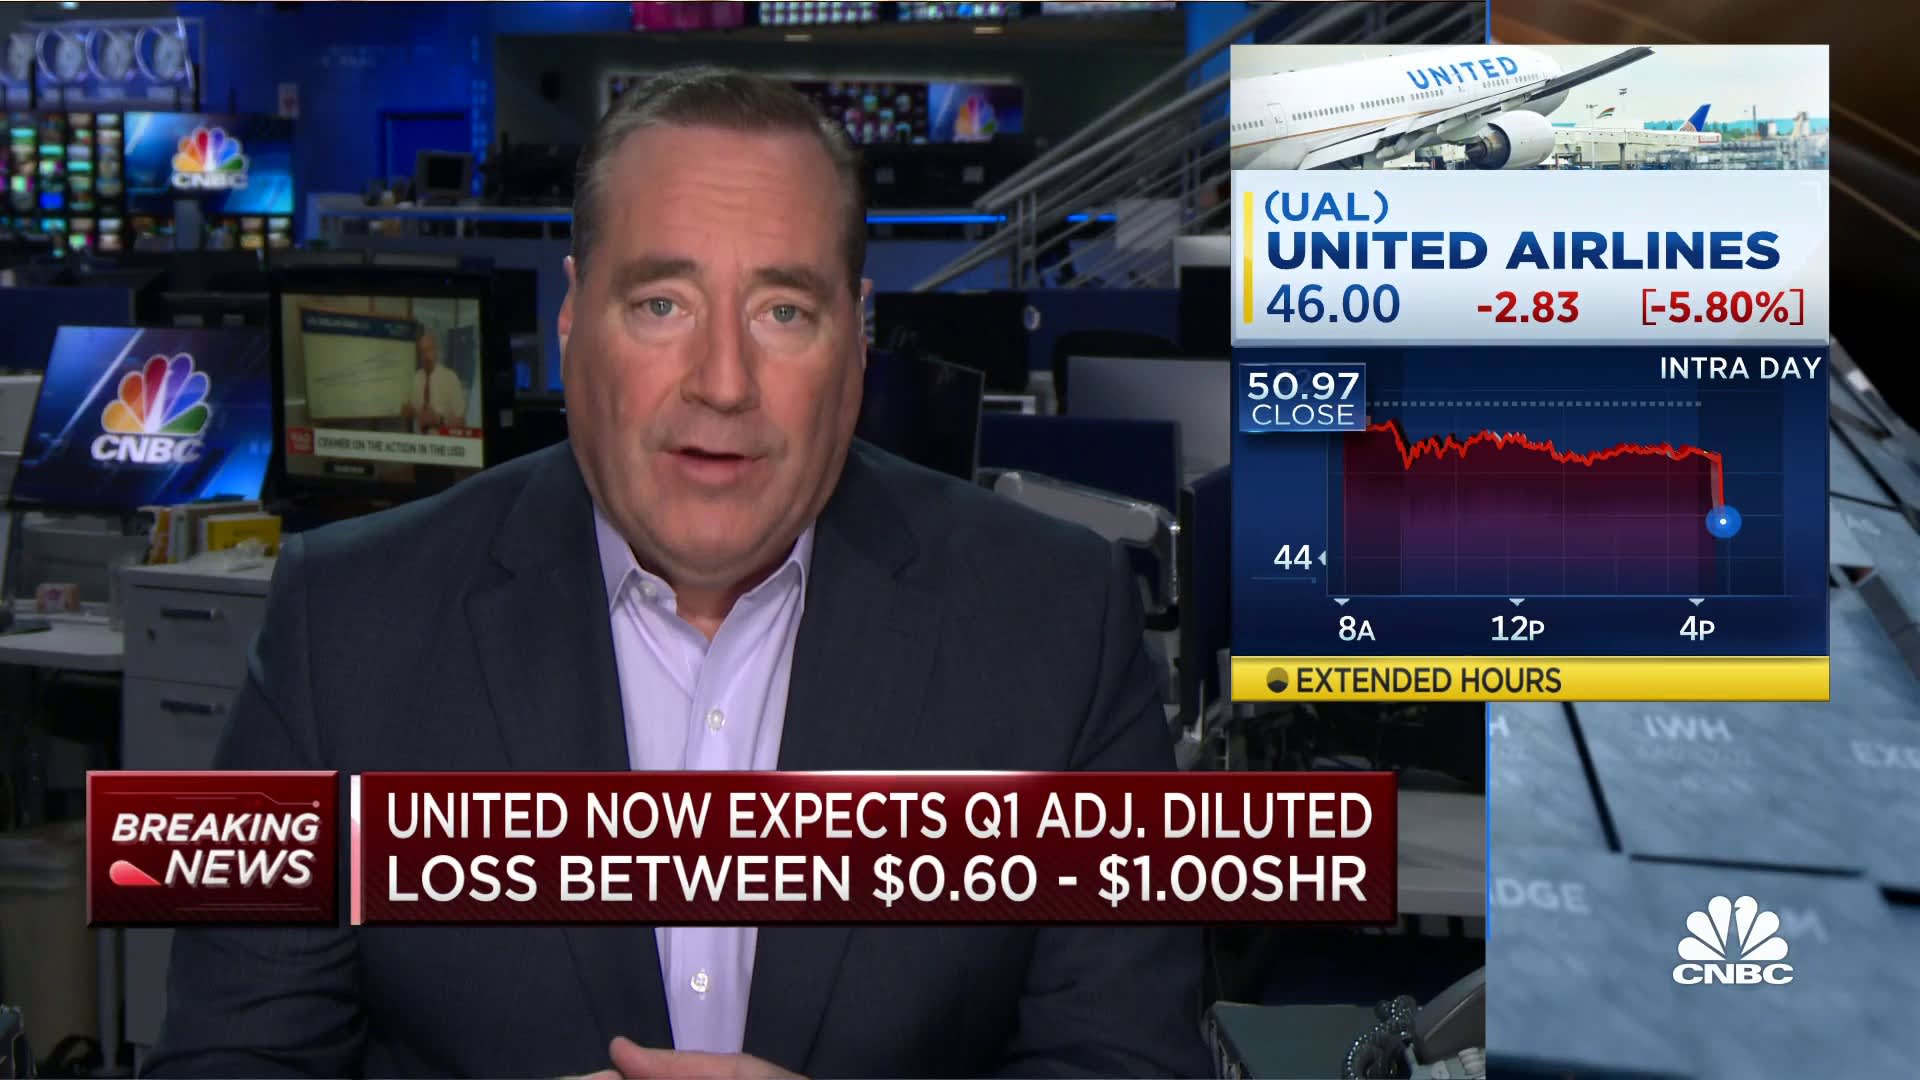 United shares down on news the company expects a Q1 loss